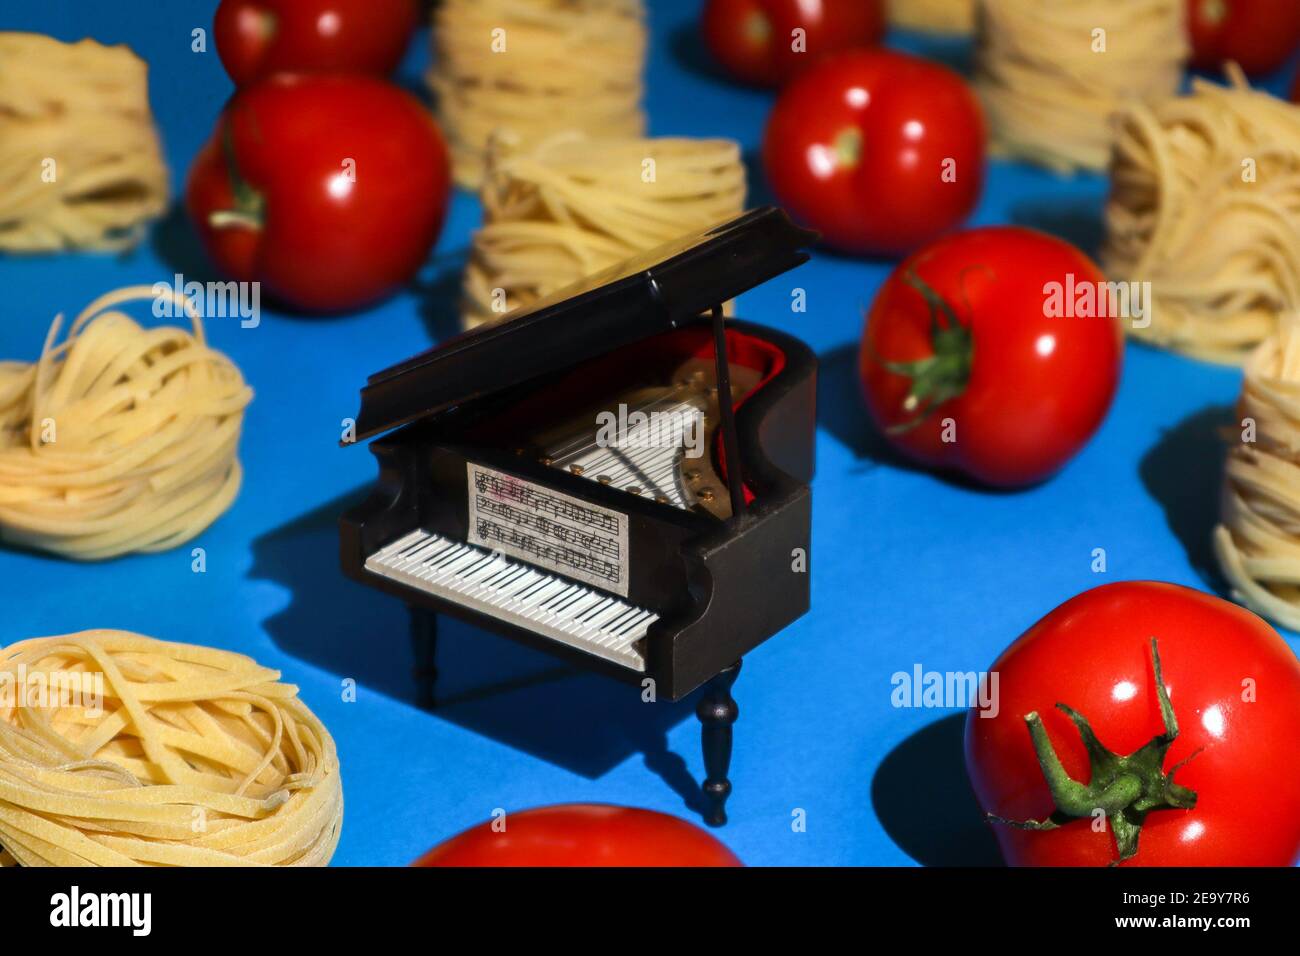 Toy grand piano staying between pasta nests and ripe tomatoes stacked in rows against bright azure background, absurd food photo Stock Photo